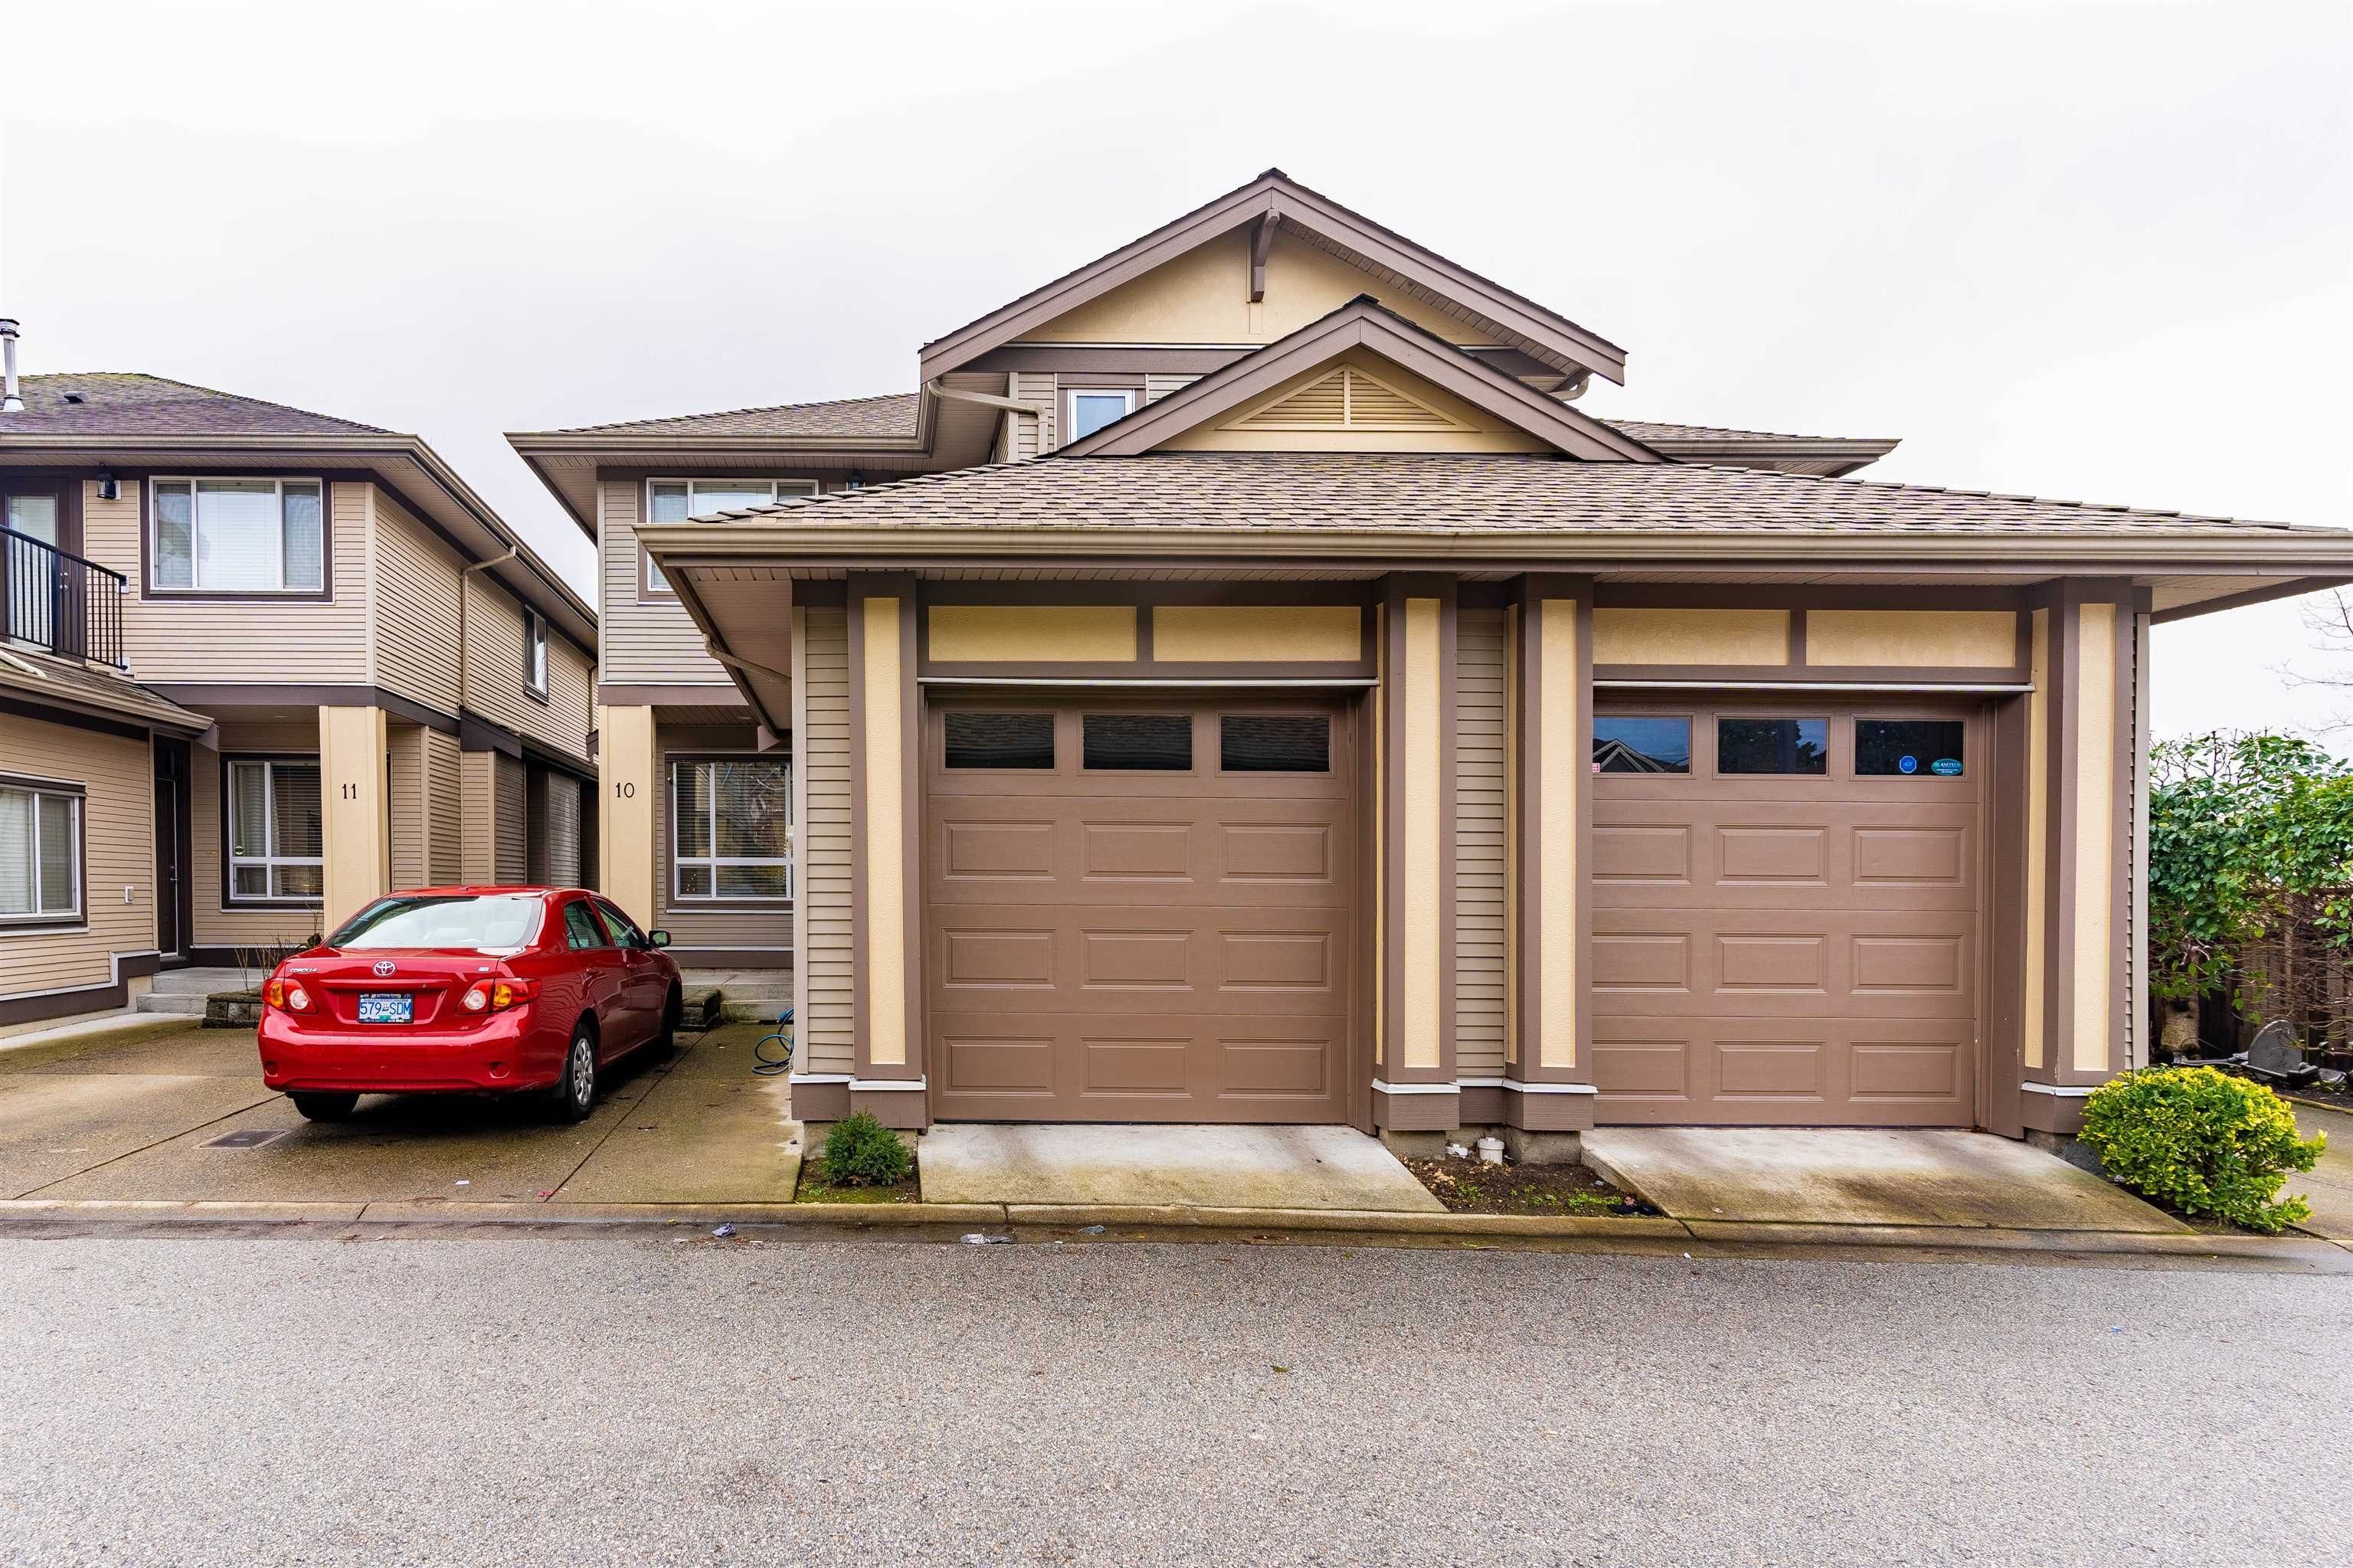 Main Photo: 10 15168 66A Avenue in Surrey: East Newton Townhouse for sale : MLS®# R2639397